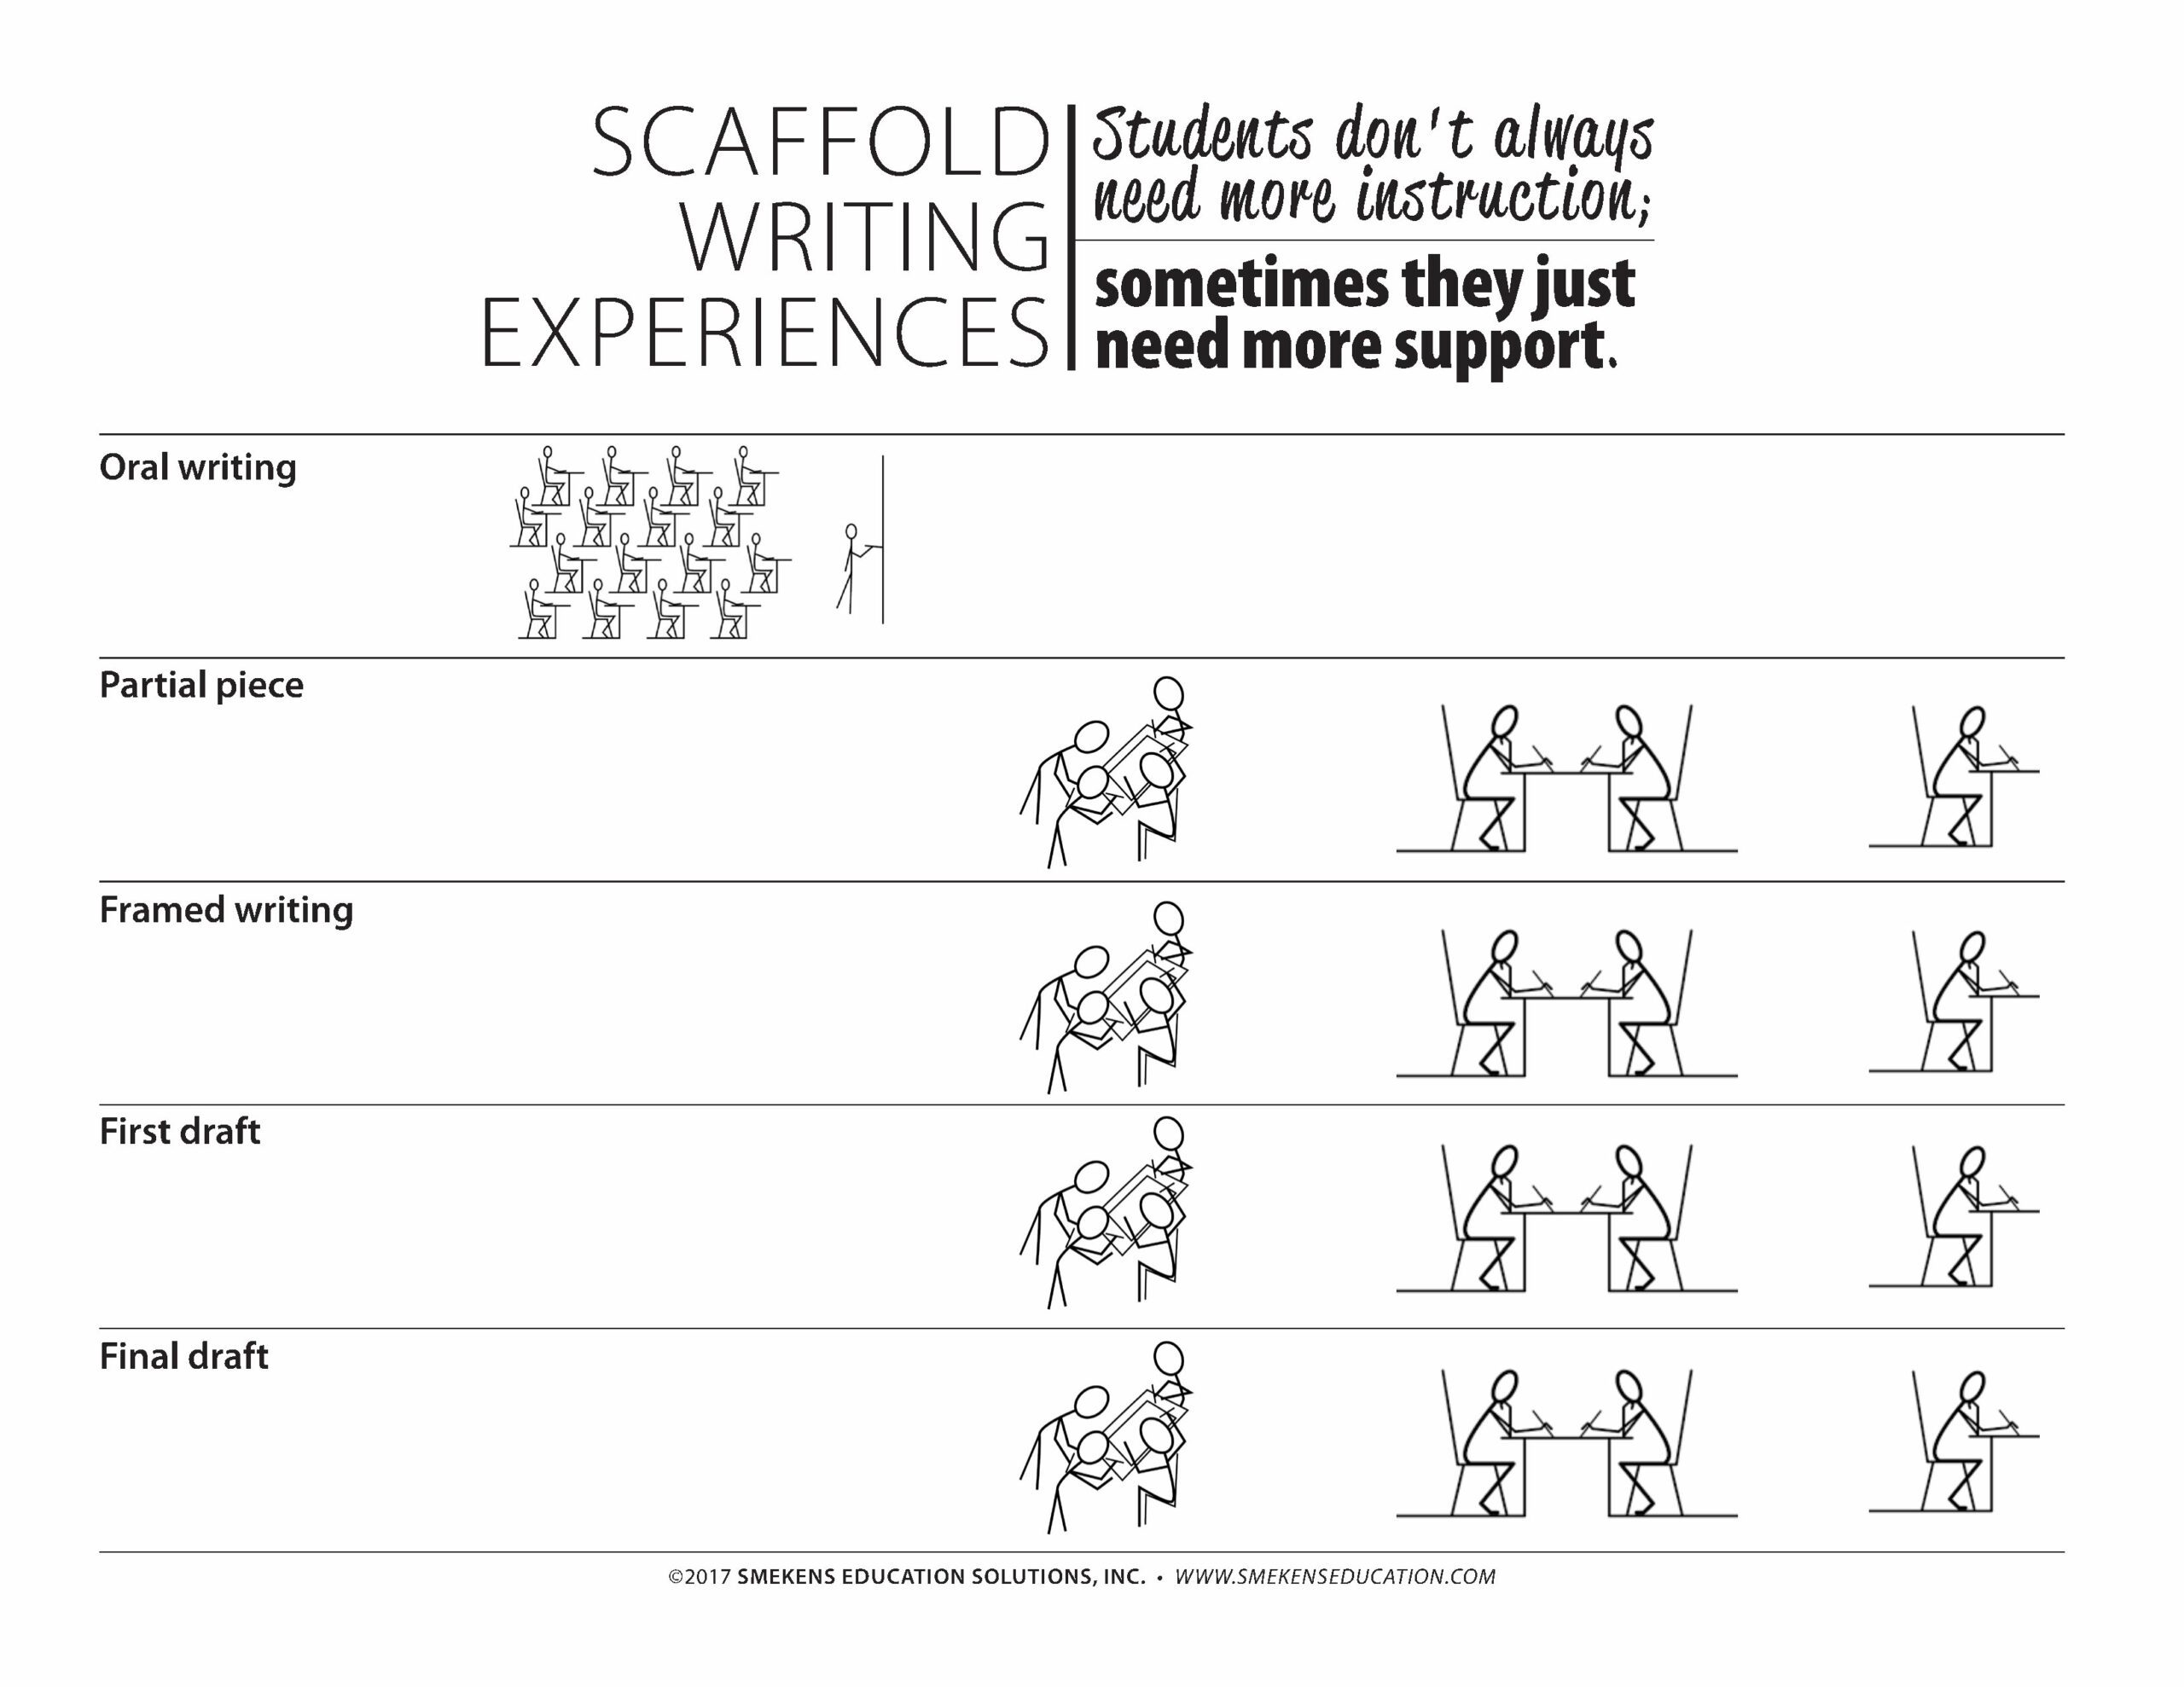 Scaffold Writing Experiences - Product & Support